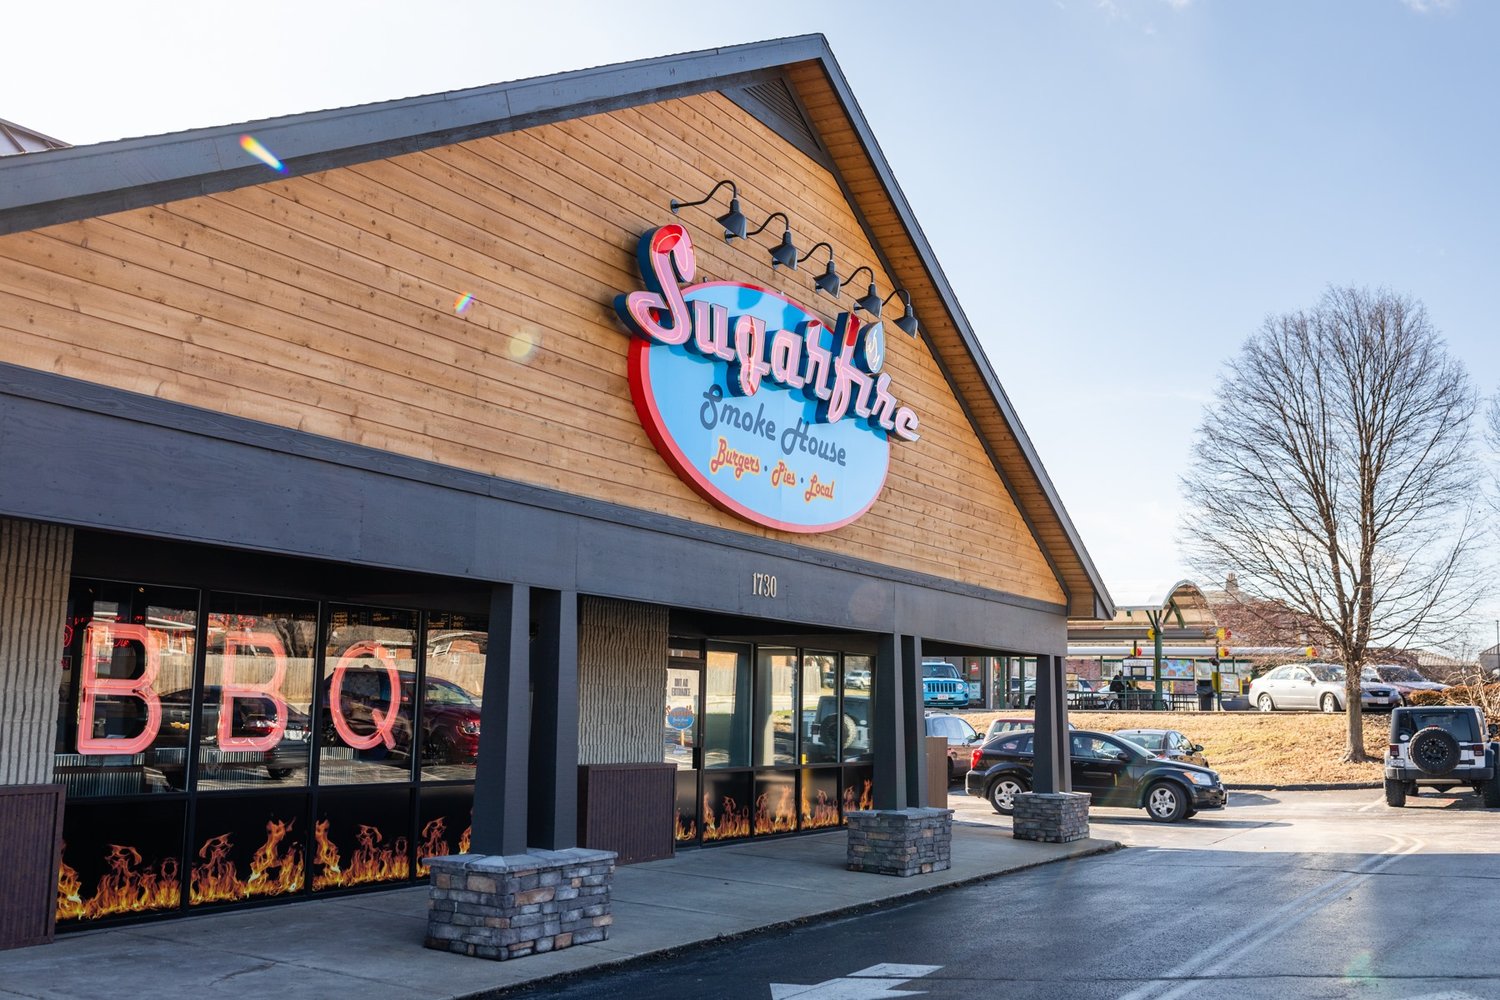 The individual's visit to Sugarfire Smokehouse came the same day restaurants were allowed to reopen to dine-in customers.